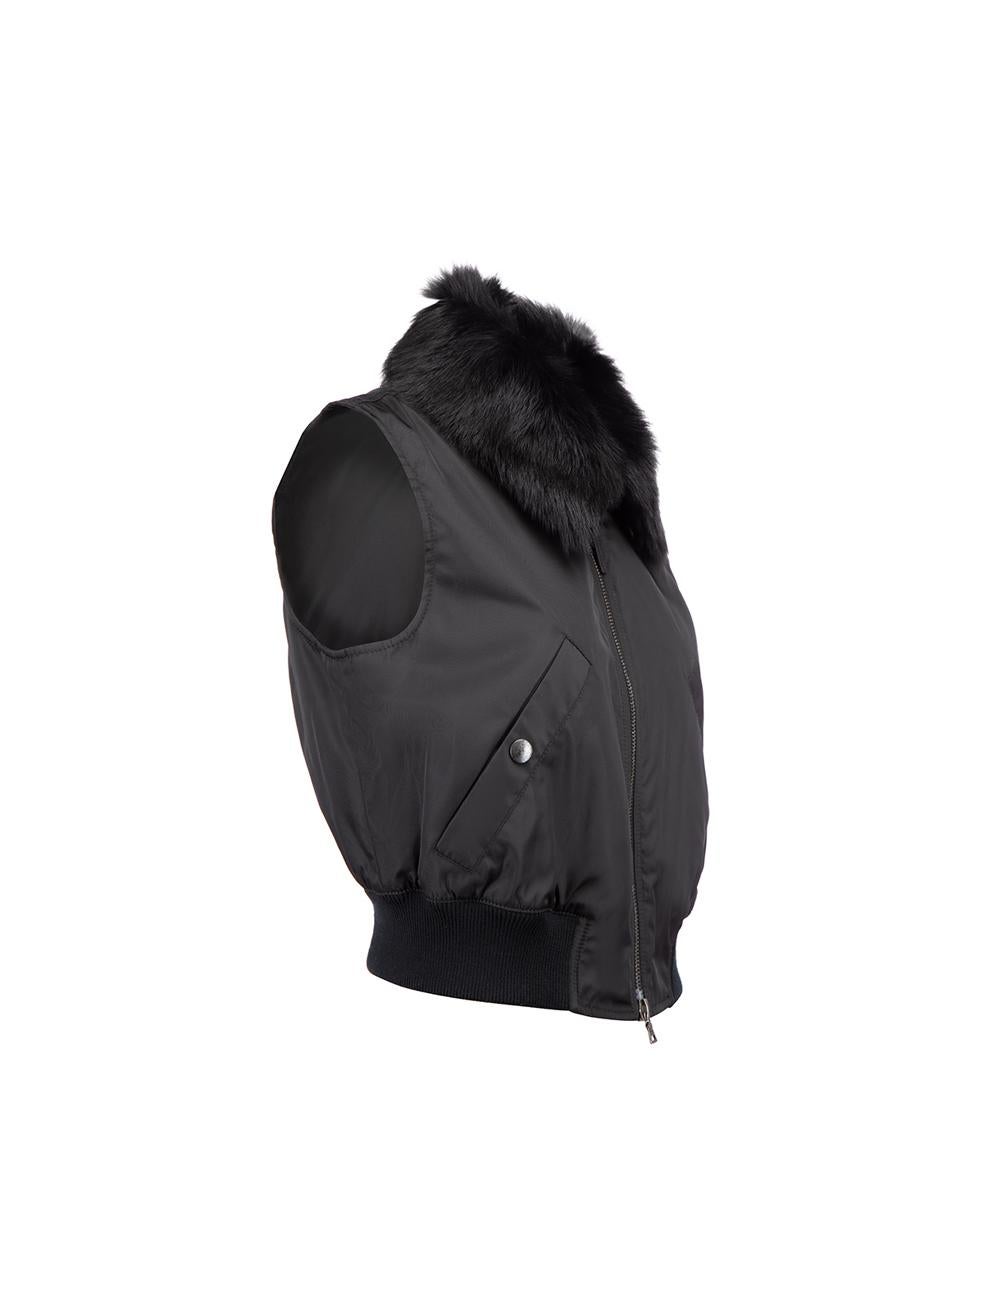 CONDITION is Very good. Hardly any visible wear to gilet is evident on this used Prada designer resale item.



Details


Black 

Fur-Trim Collar Gilet

Front zip

Sleeveless

Two front pockets   

Button detachable fur collar





Made in